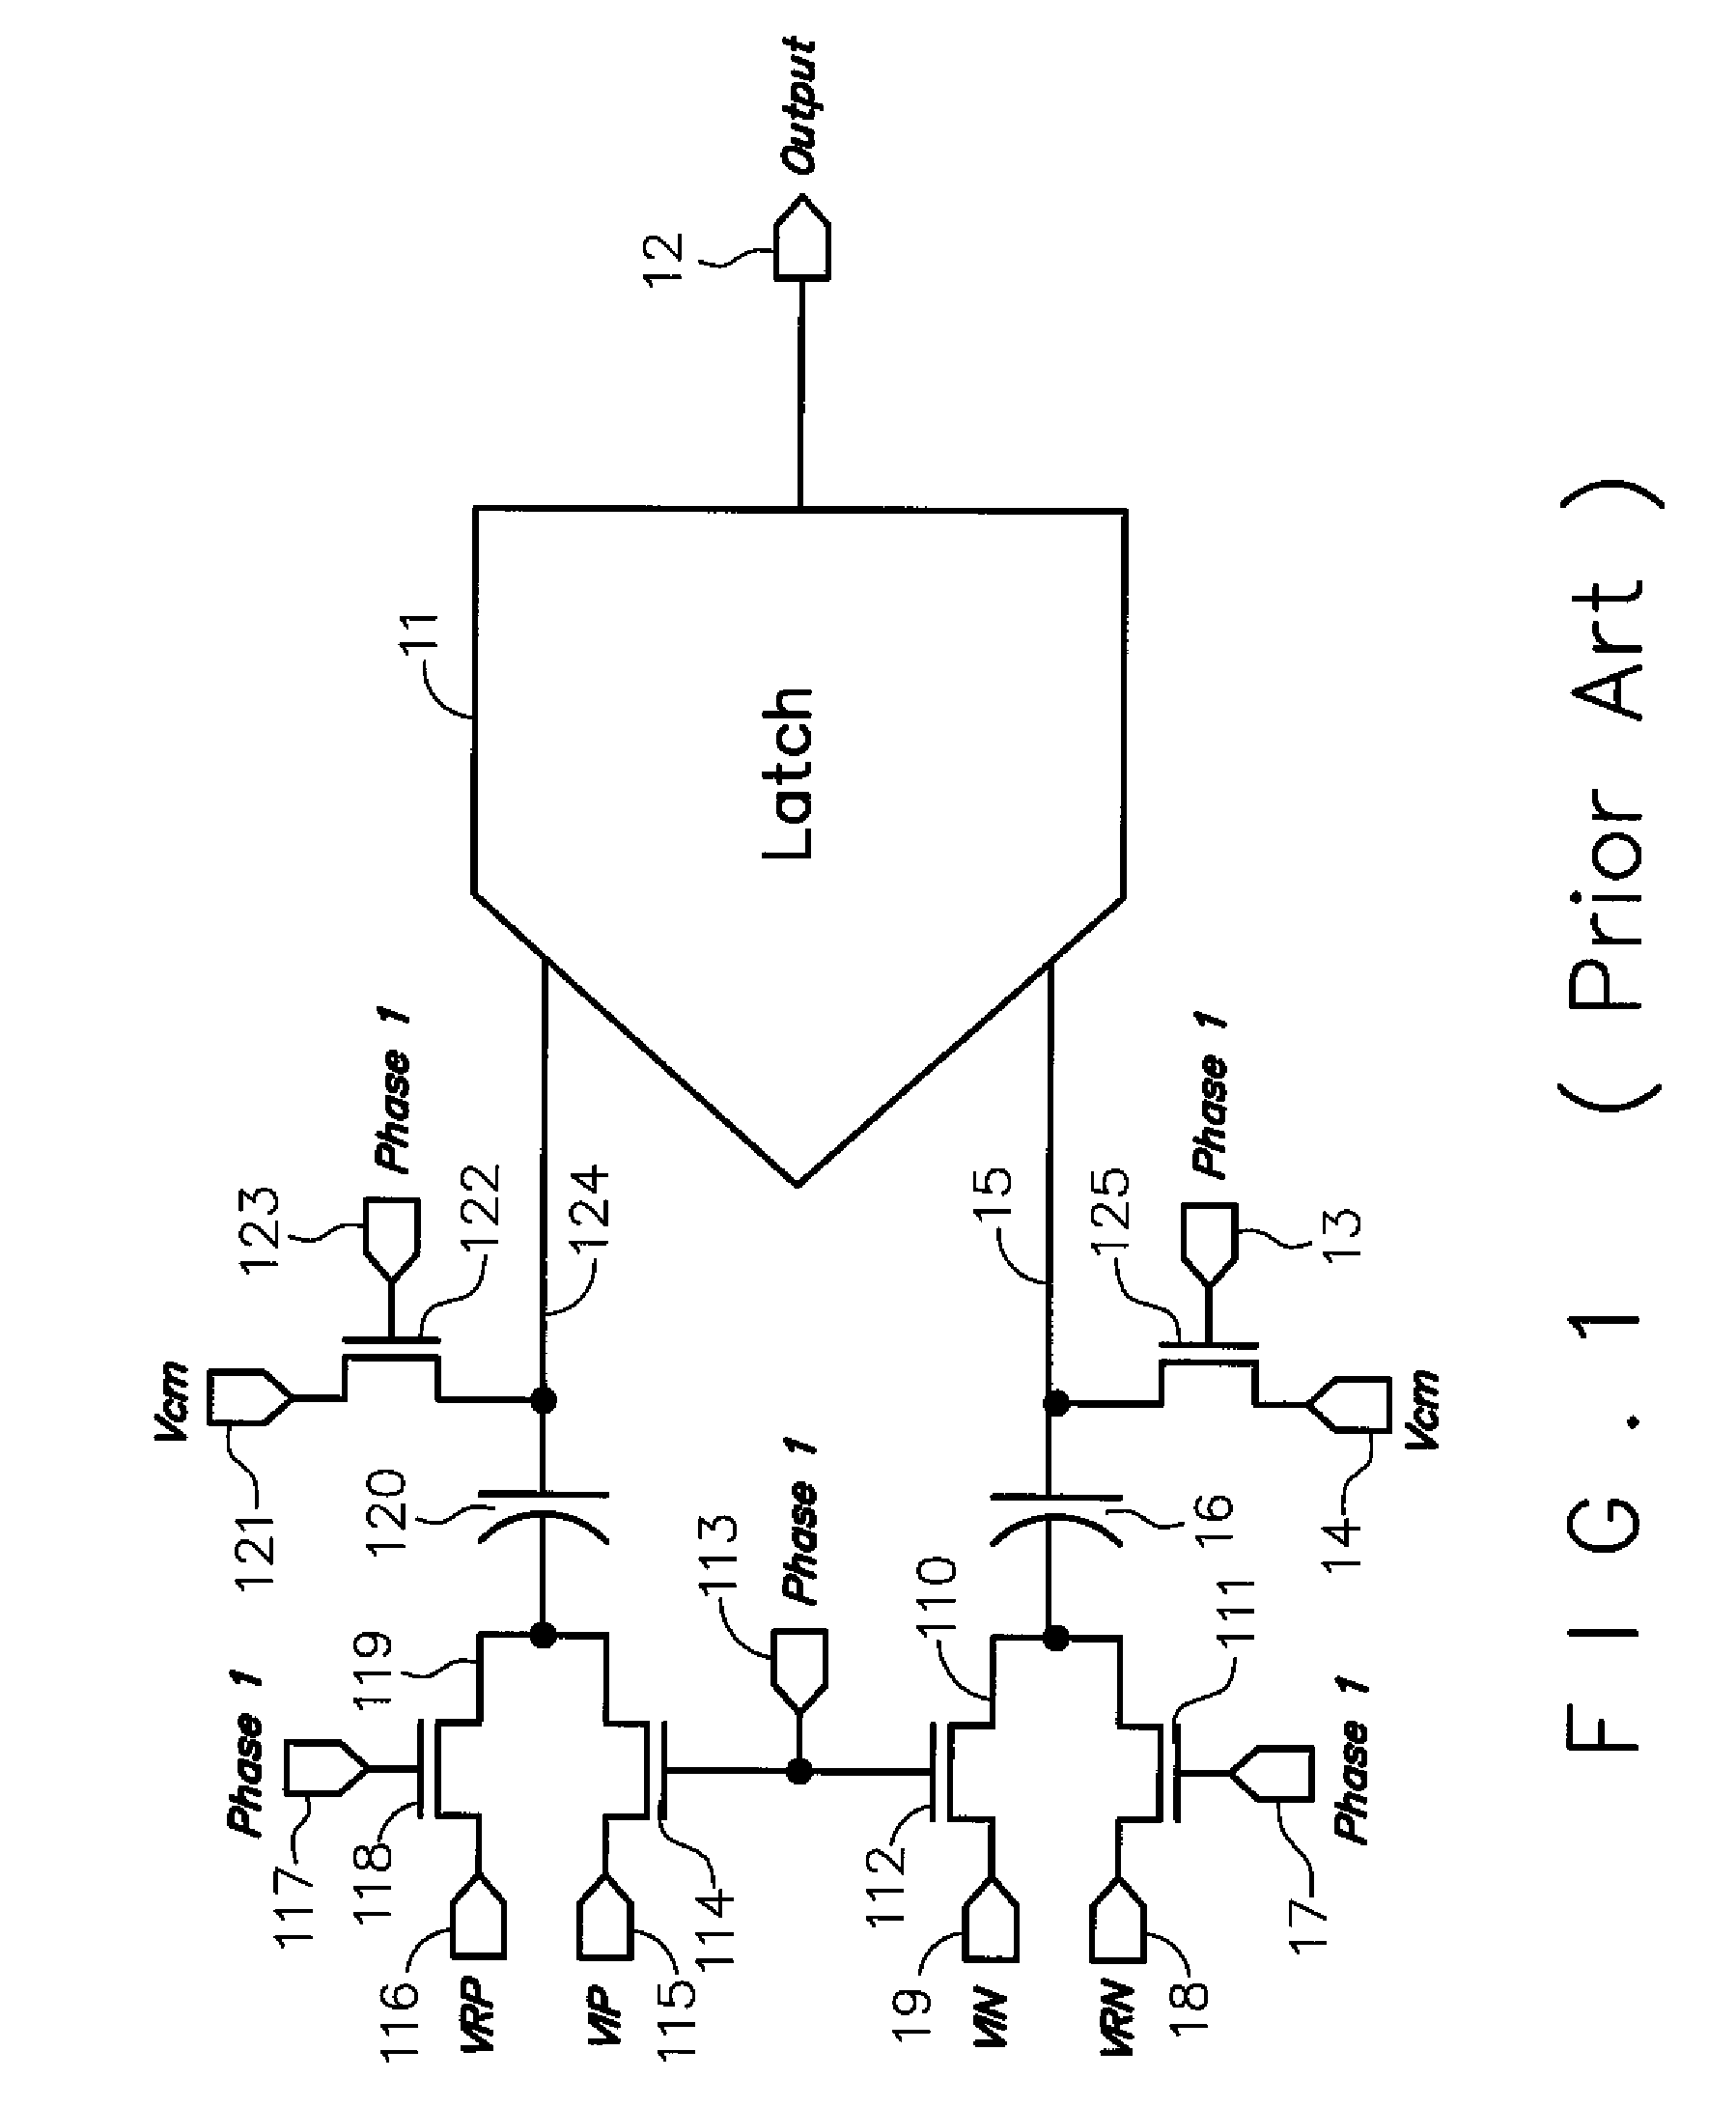 Comparator with low offset voltage